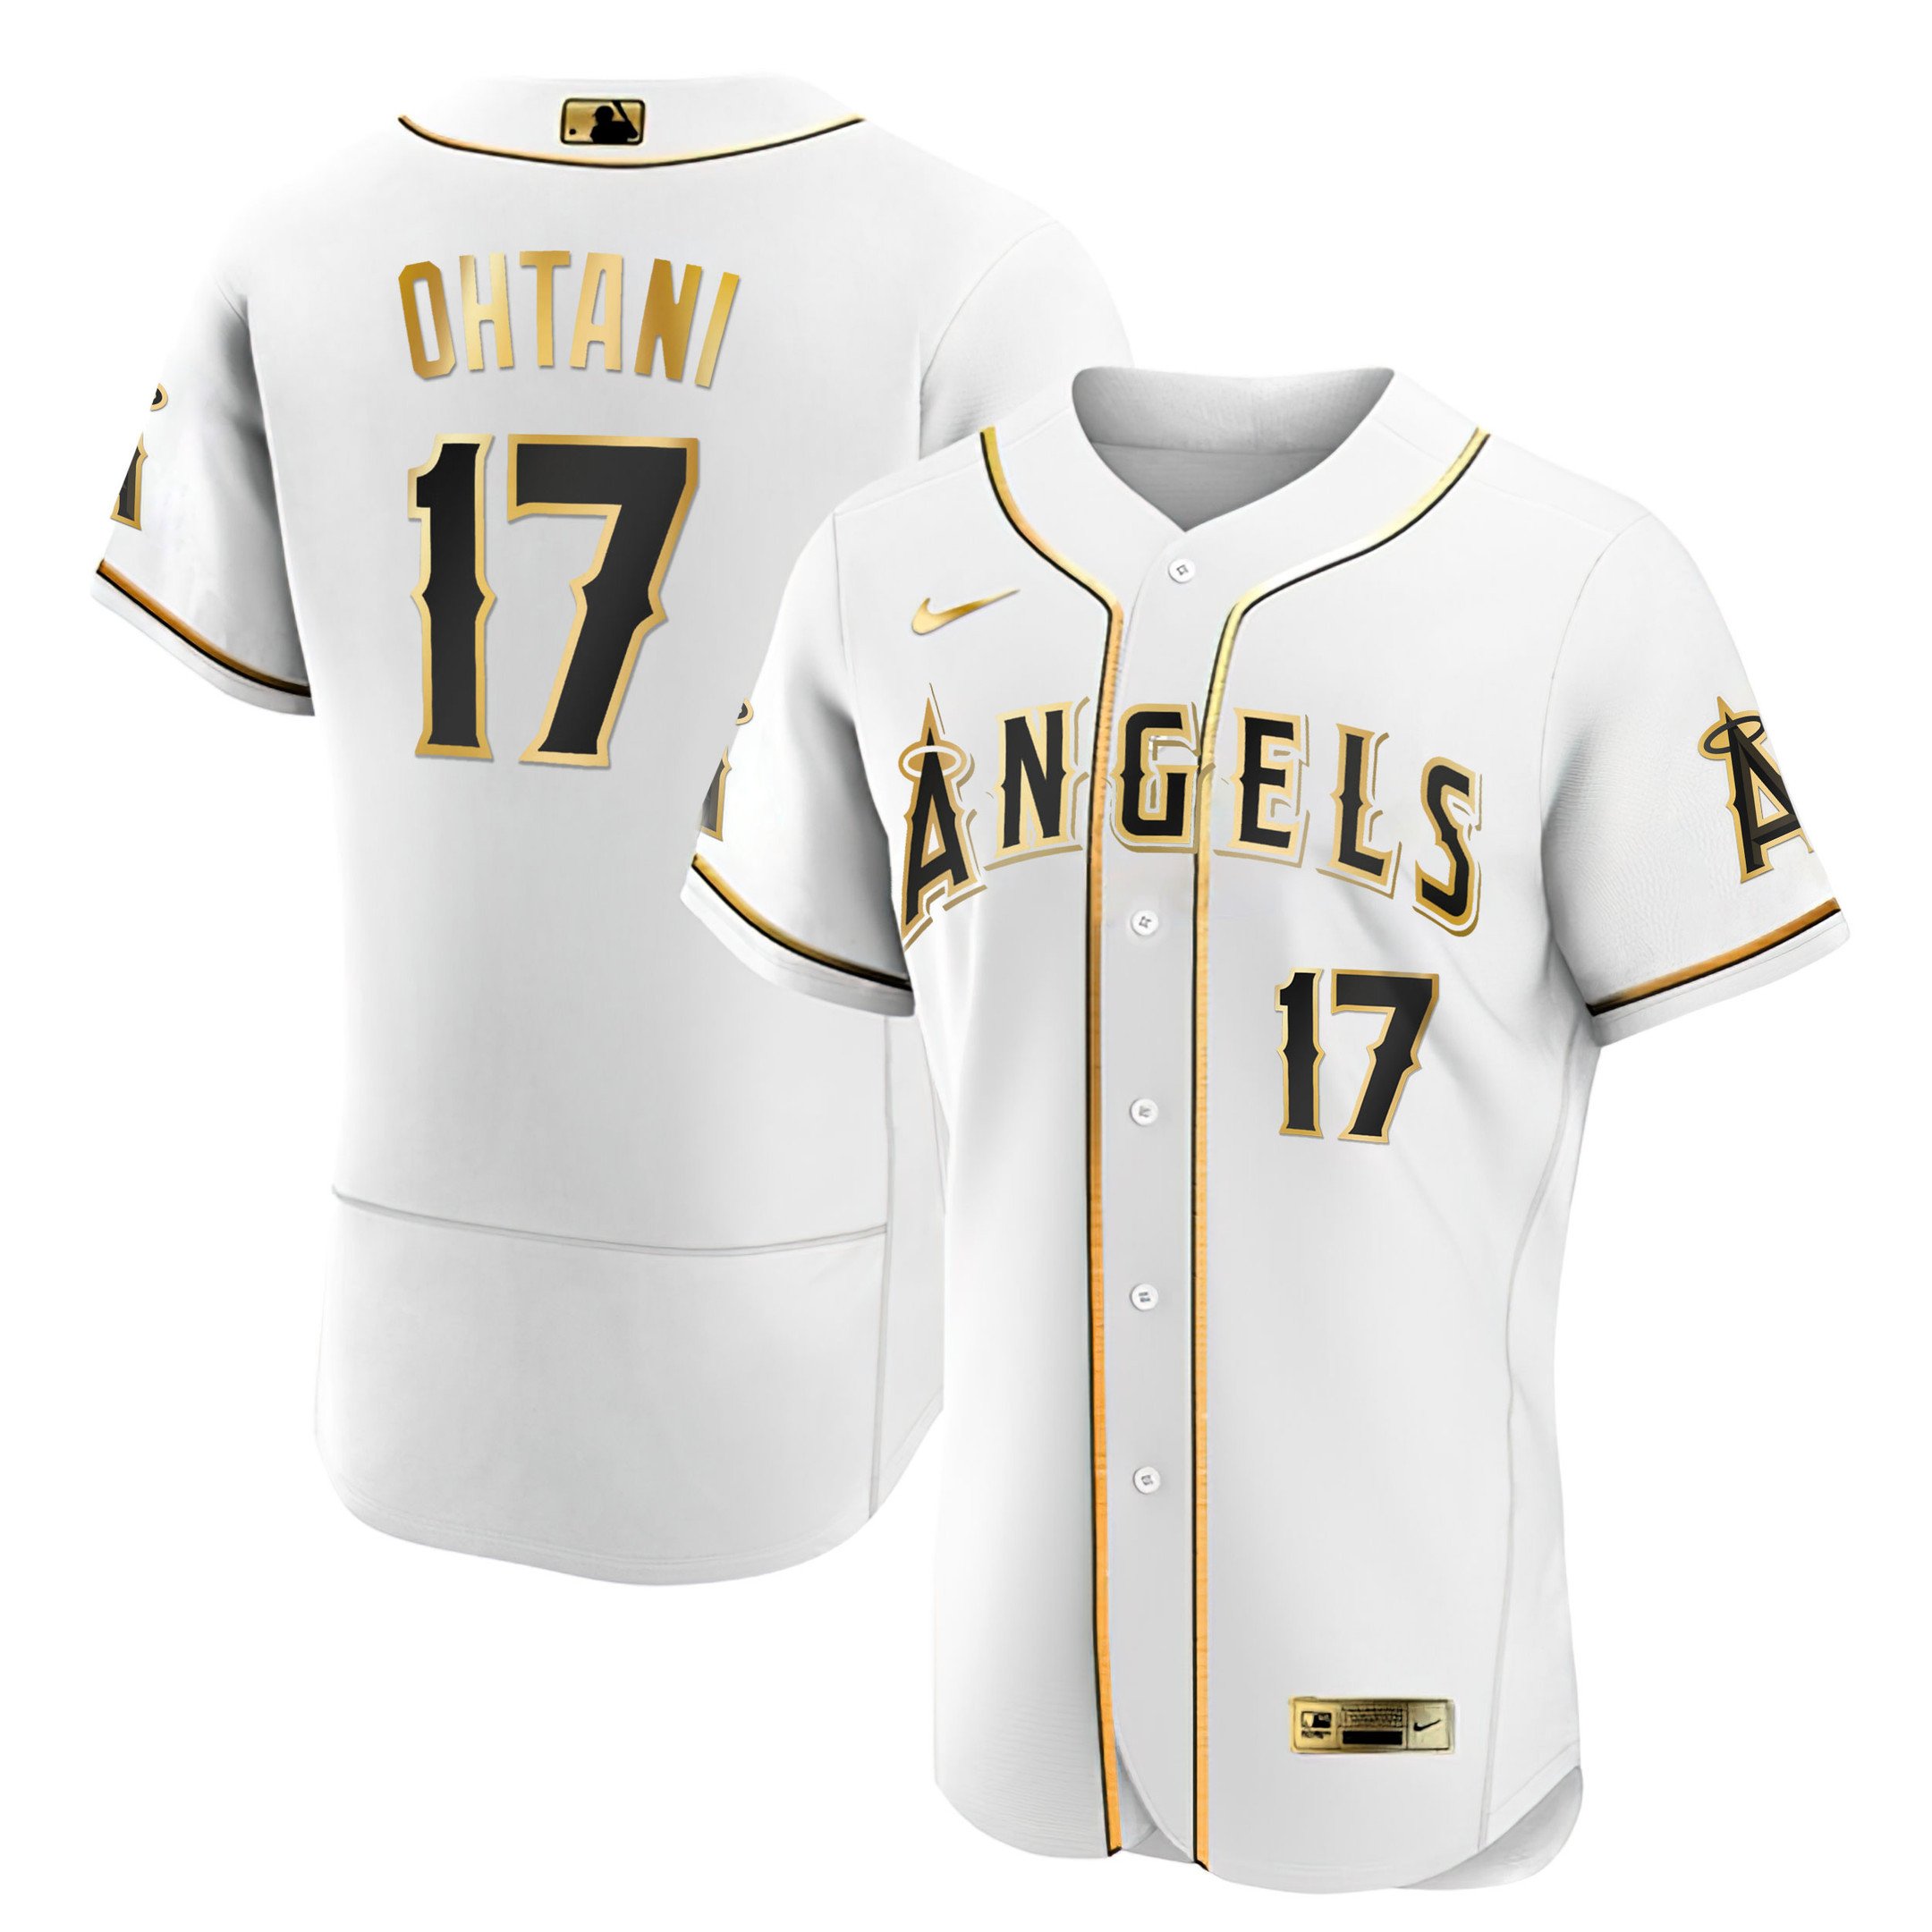 Other  Shohei Ohtani La Angels Jersey Nwt Full Japanese Various